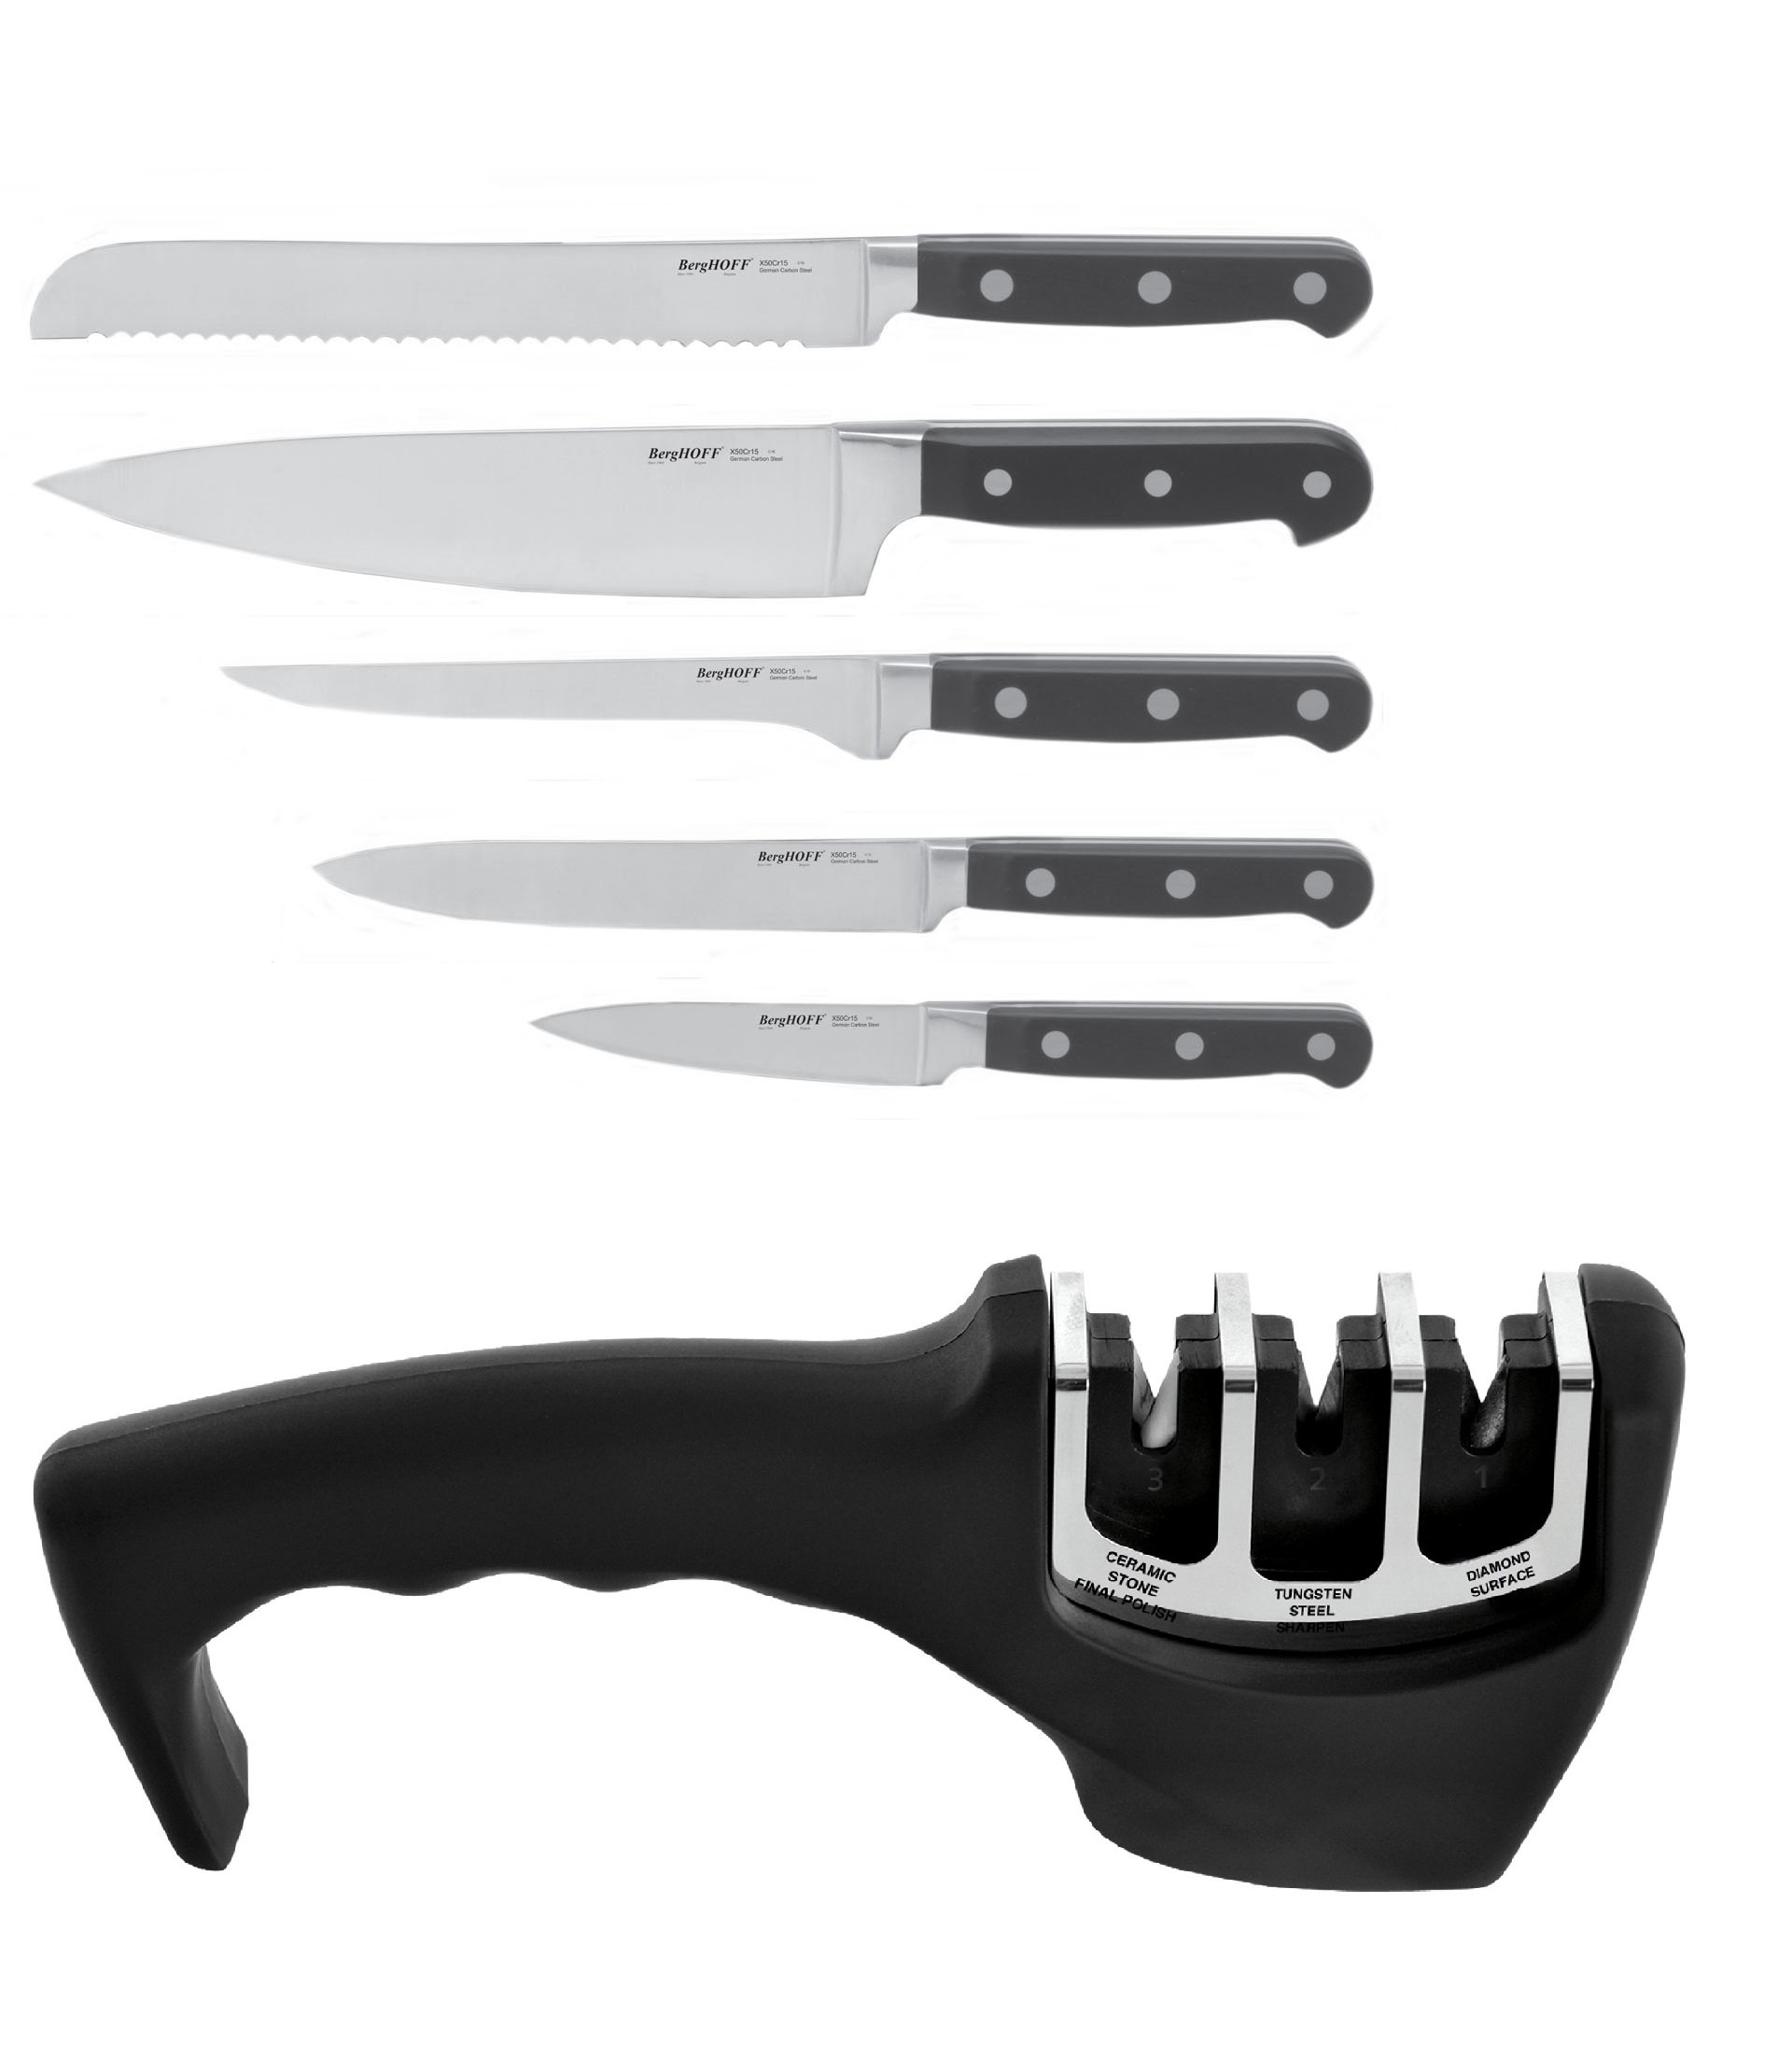 BergHOFF Essentials 18Pc Cutlery Set, Block with 8 Steak Knives,  Hand-sharpened